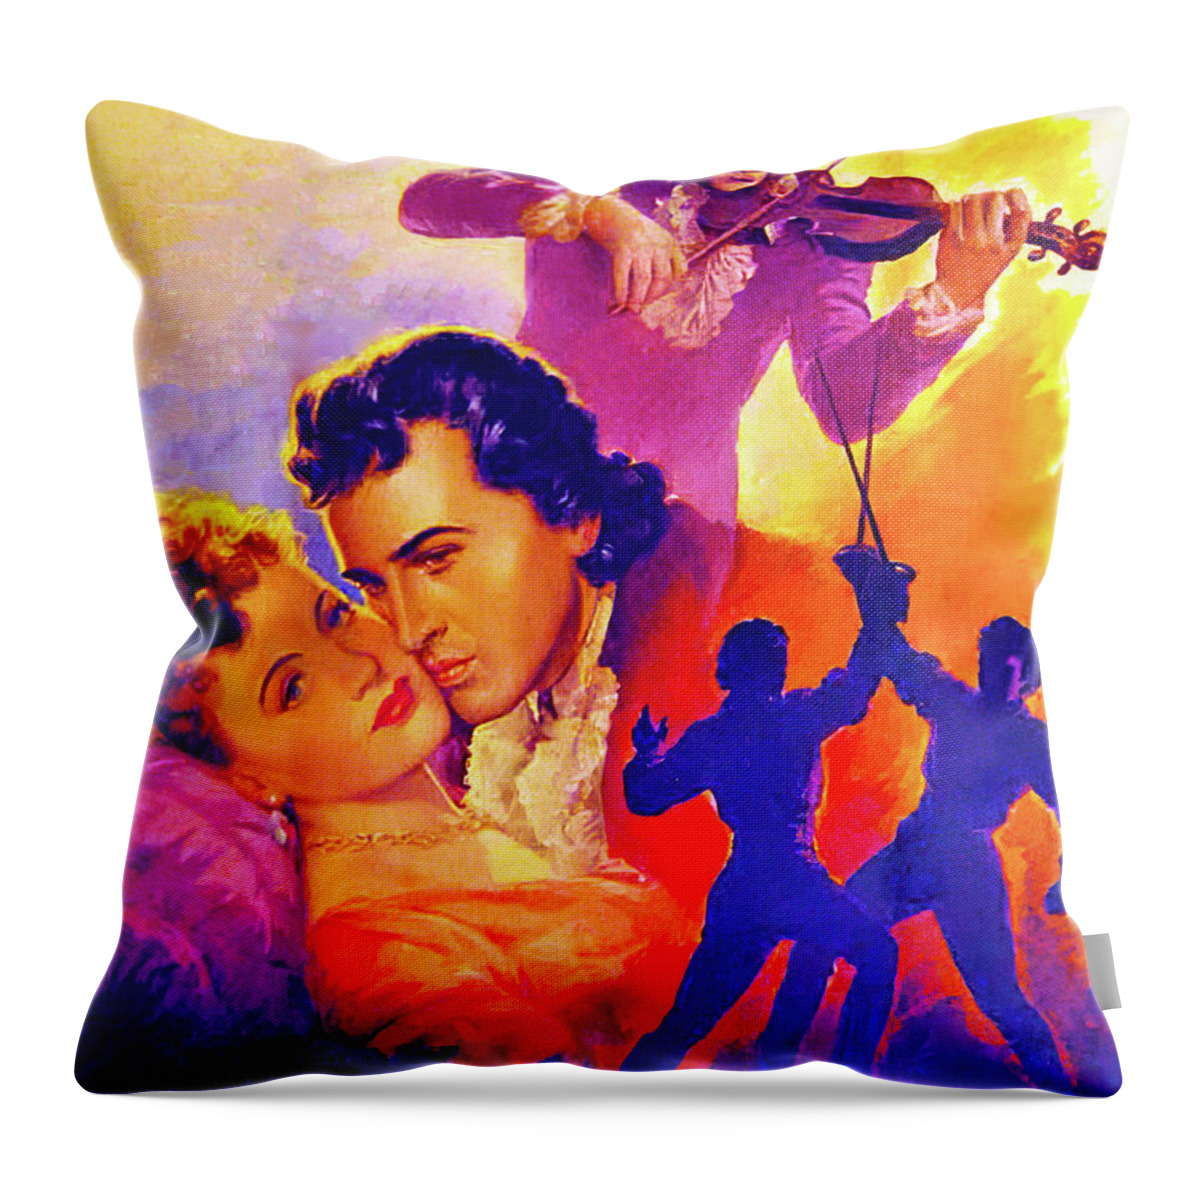 Magic Throw Pillow featuring the painting ''The Magic Bow'', 1946,movie poster painting by Anselmo Ballester by Stars on Art